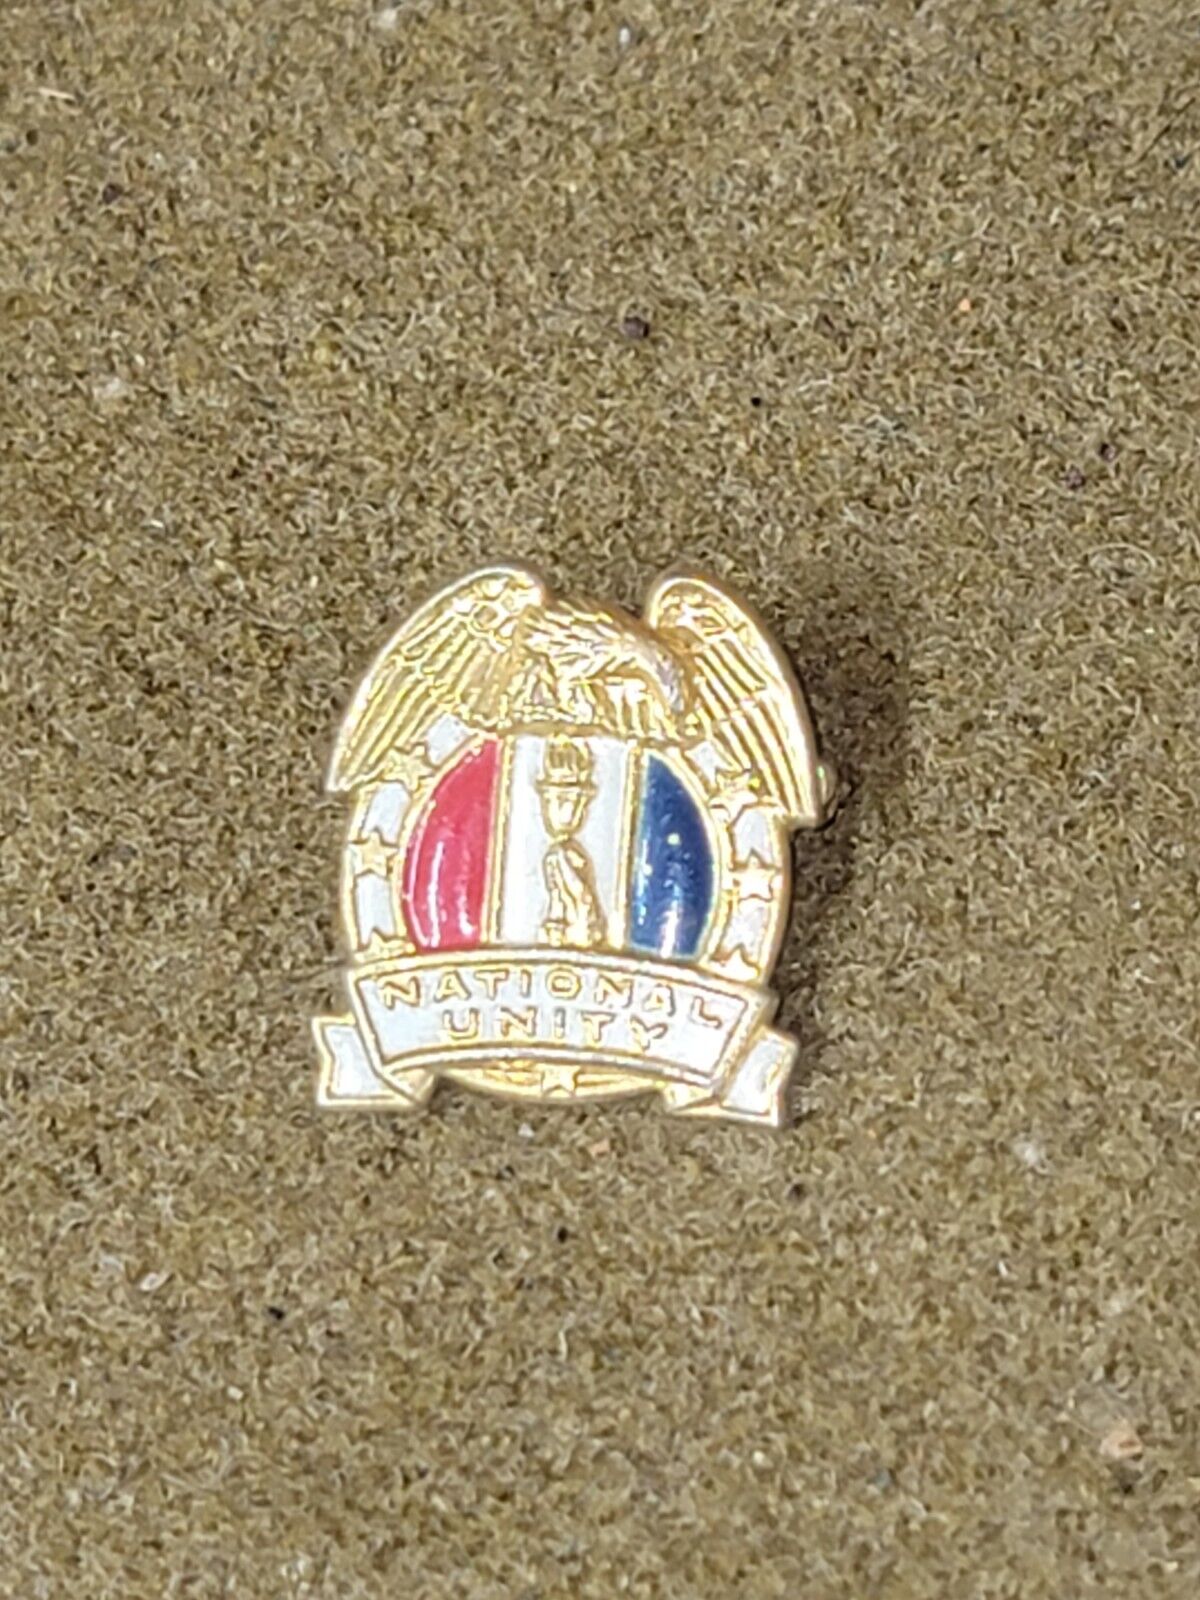 WWII National Unity Pin